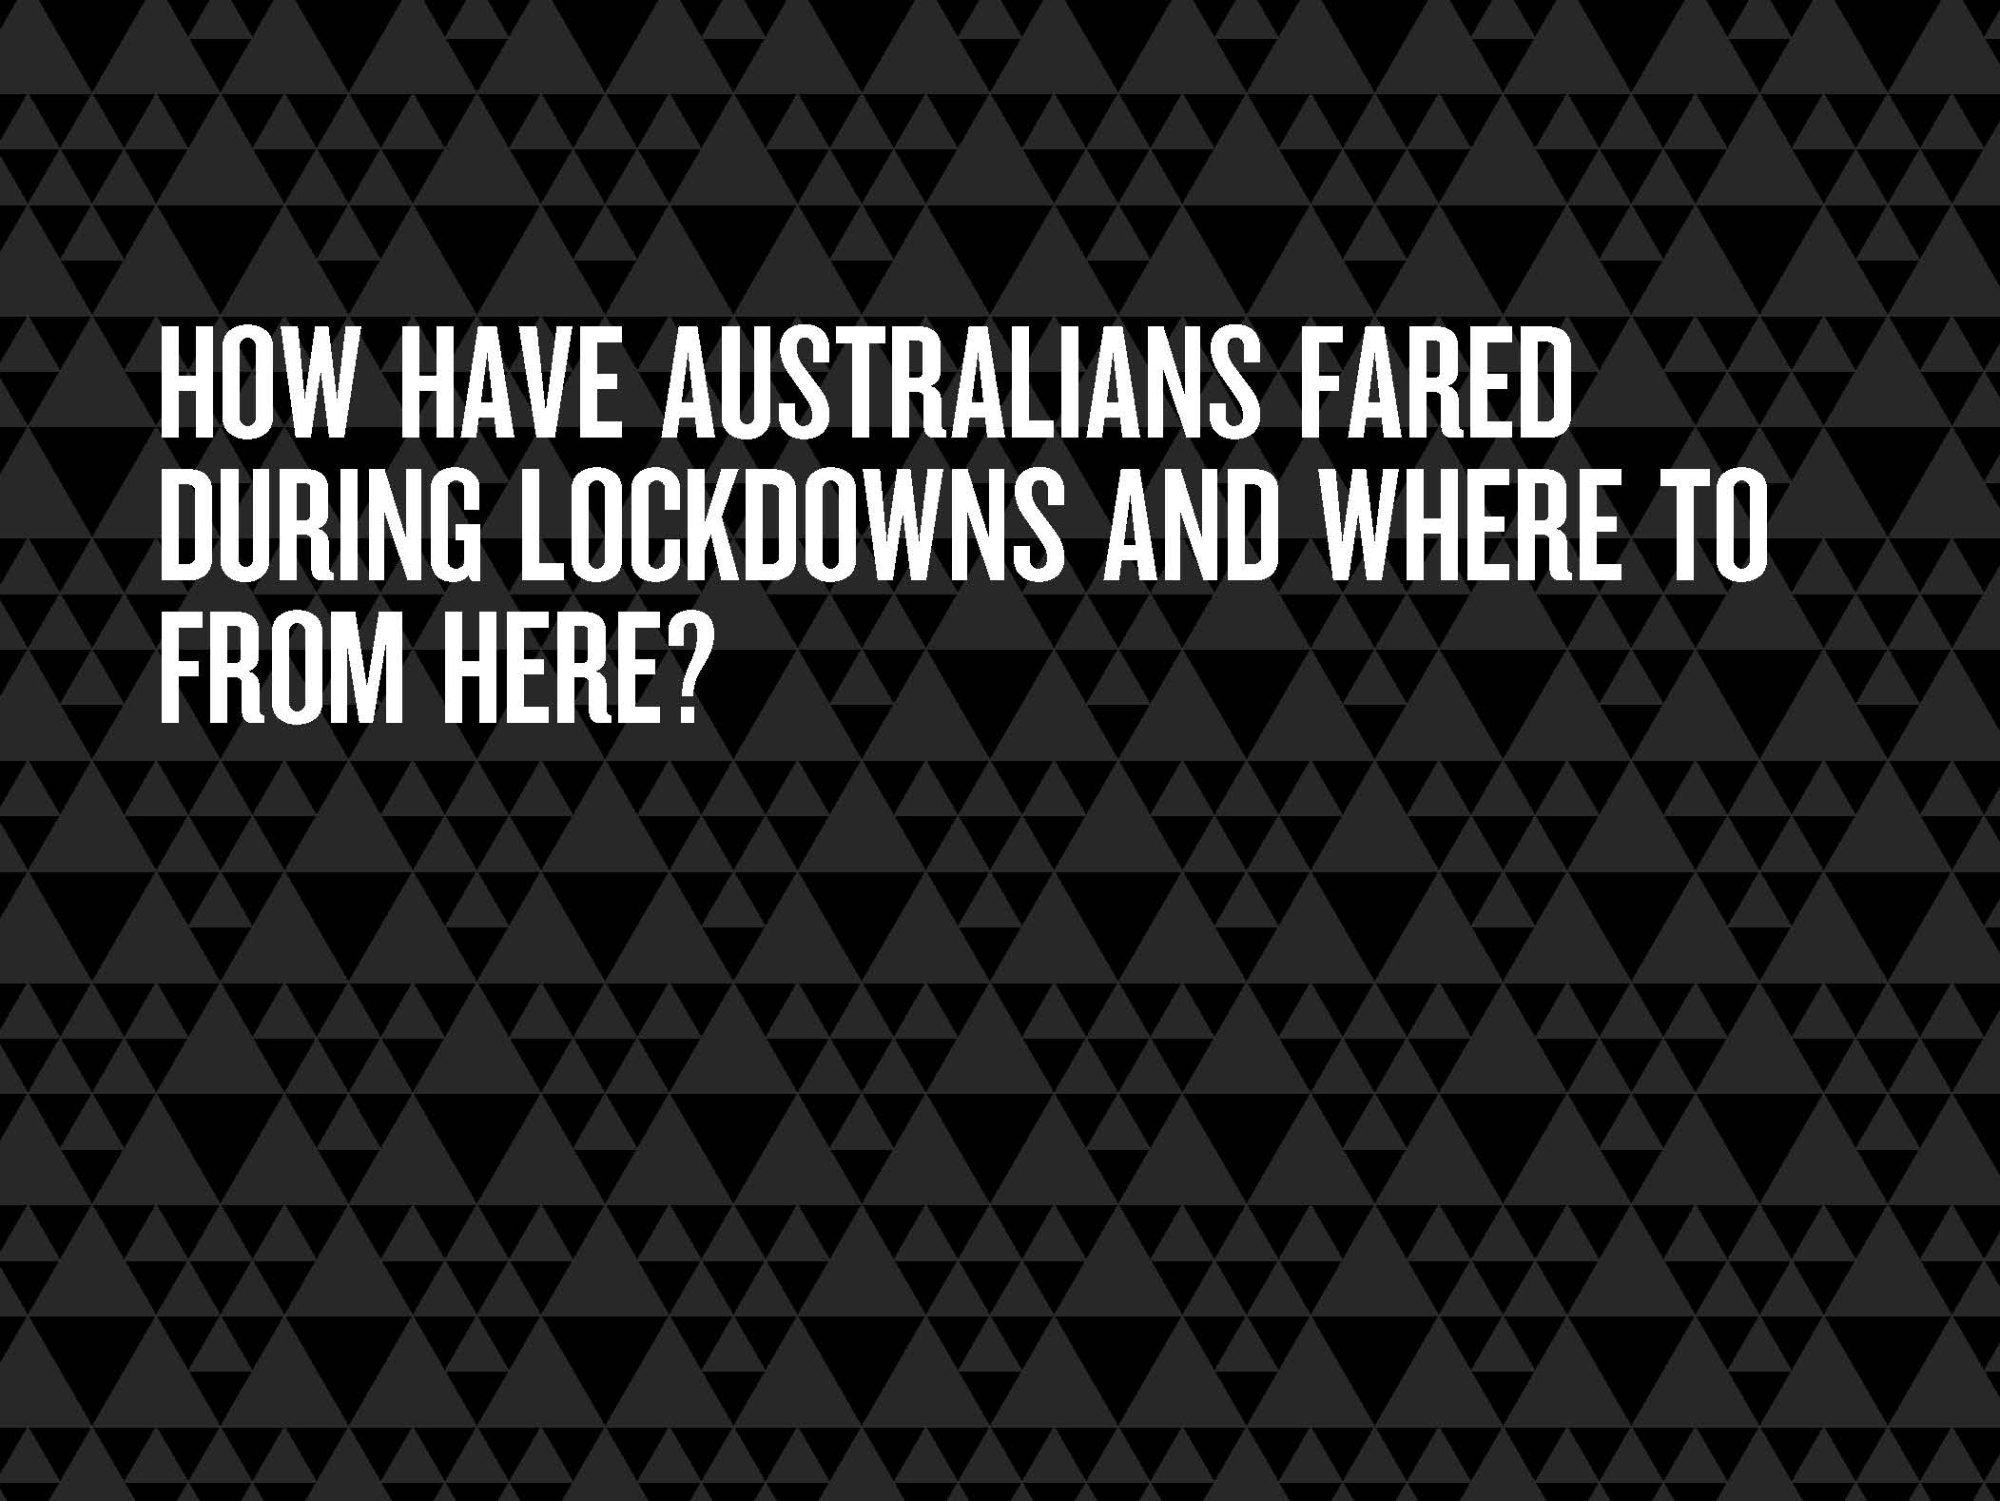 NAB Behavioural Insights Life in Lockdown Business Research and